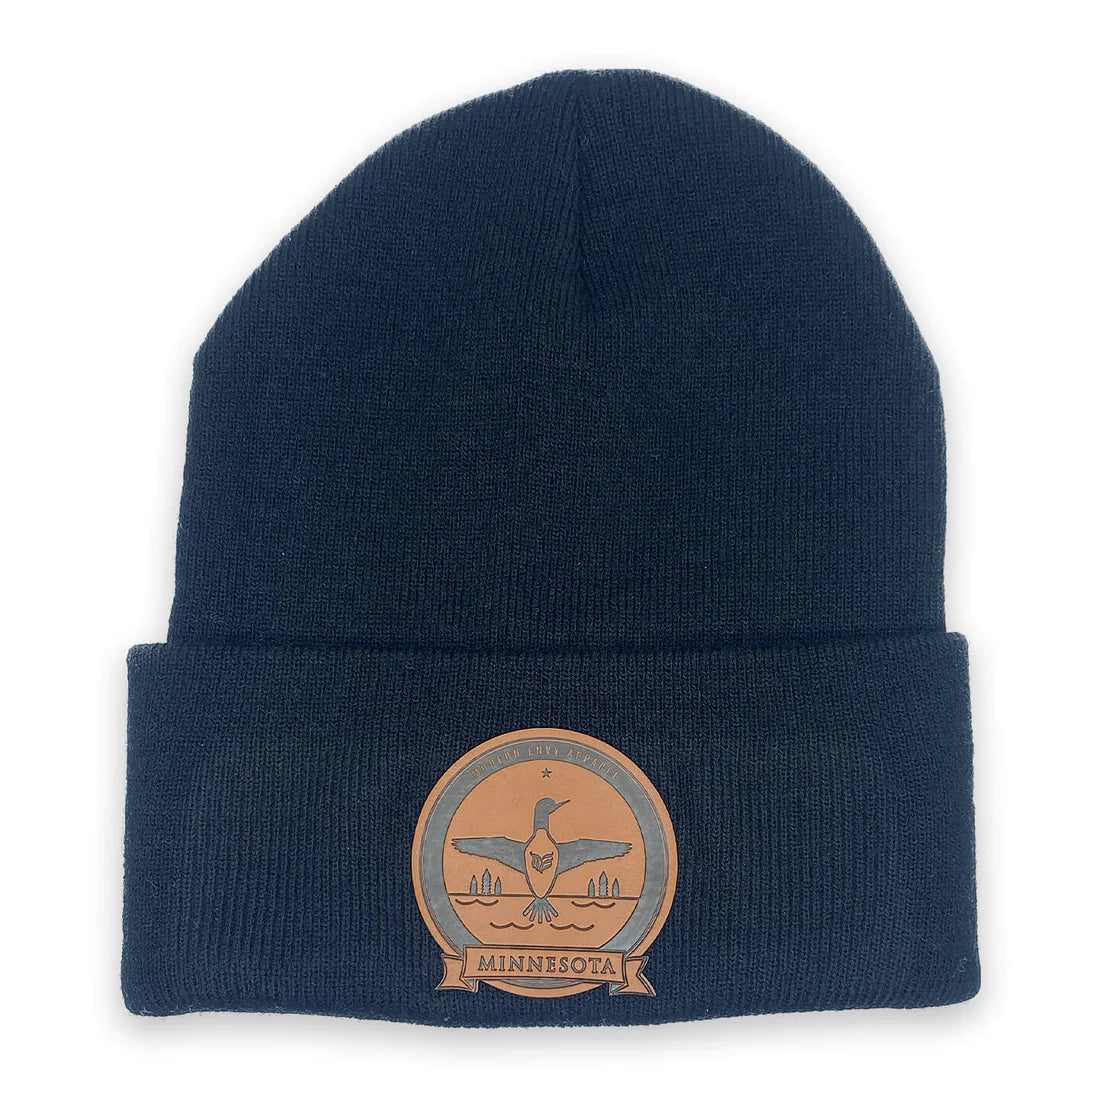 Cuffed Beanie with Leather Loon Patch